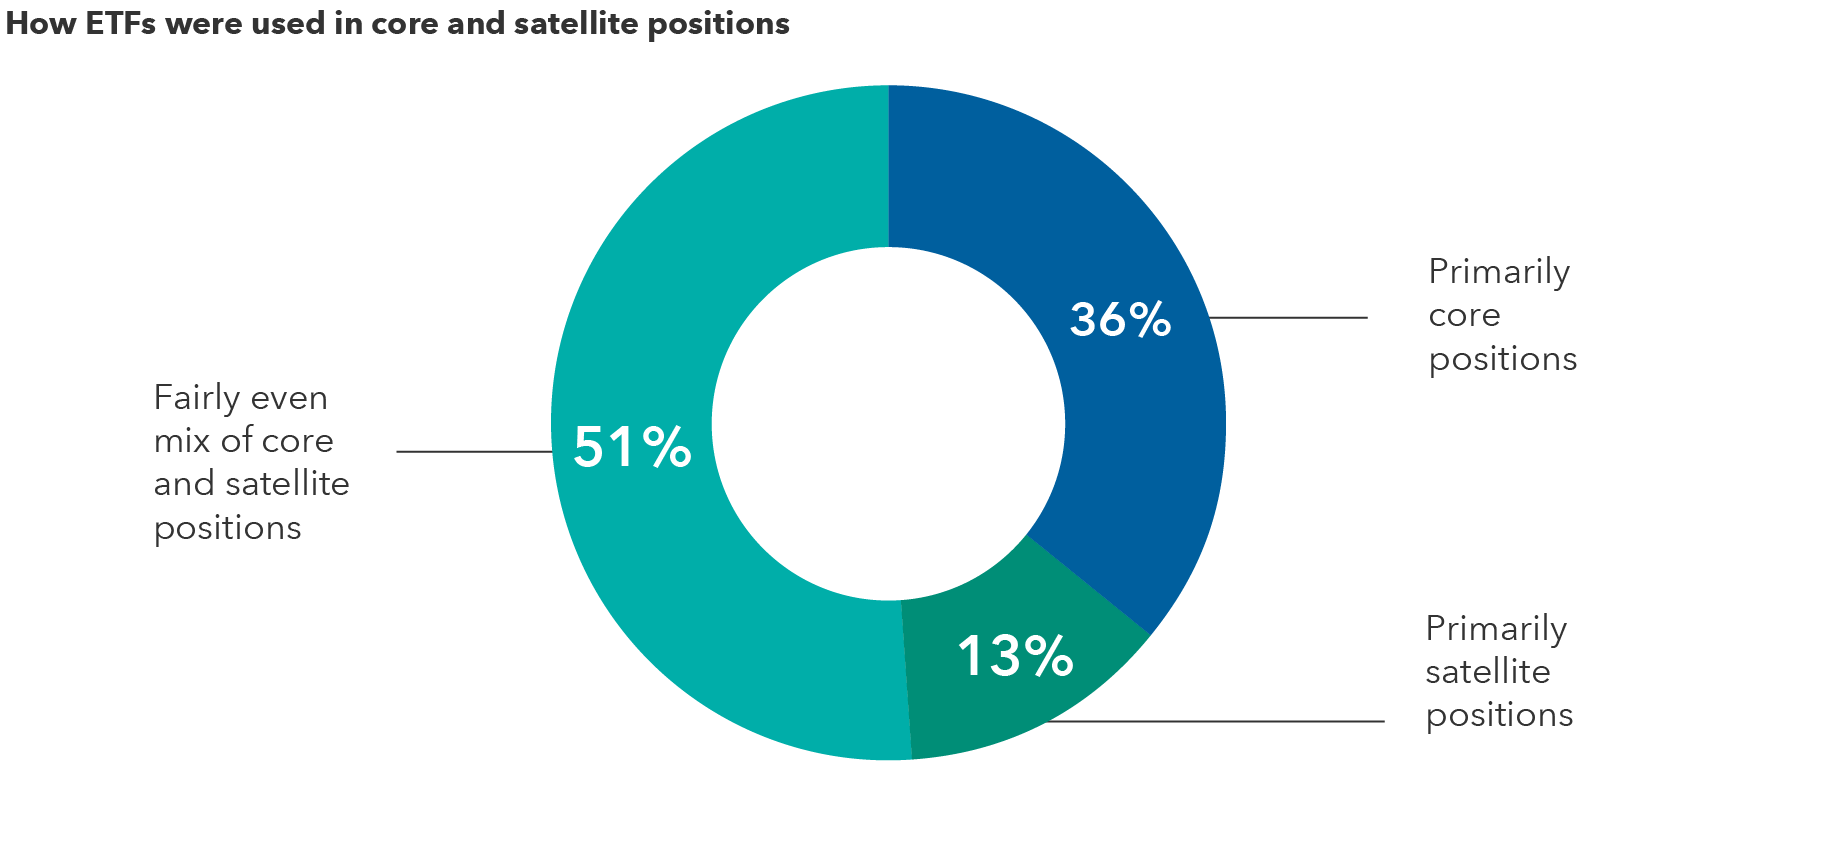 A doughnut chart showing how advisors used ETFs in core and satellite positions in their portfolios. 51% of advisors used ETFs in a fairly even mix of core and satellite positions, 36% used ETFs in primarily core positions, and 13% used ETFs in primarily satellite positions.